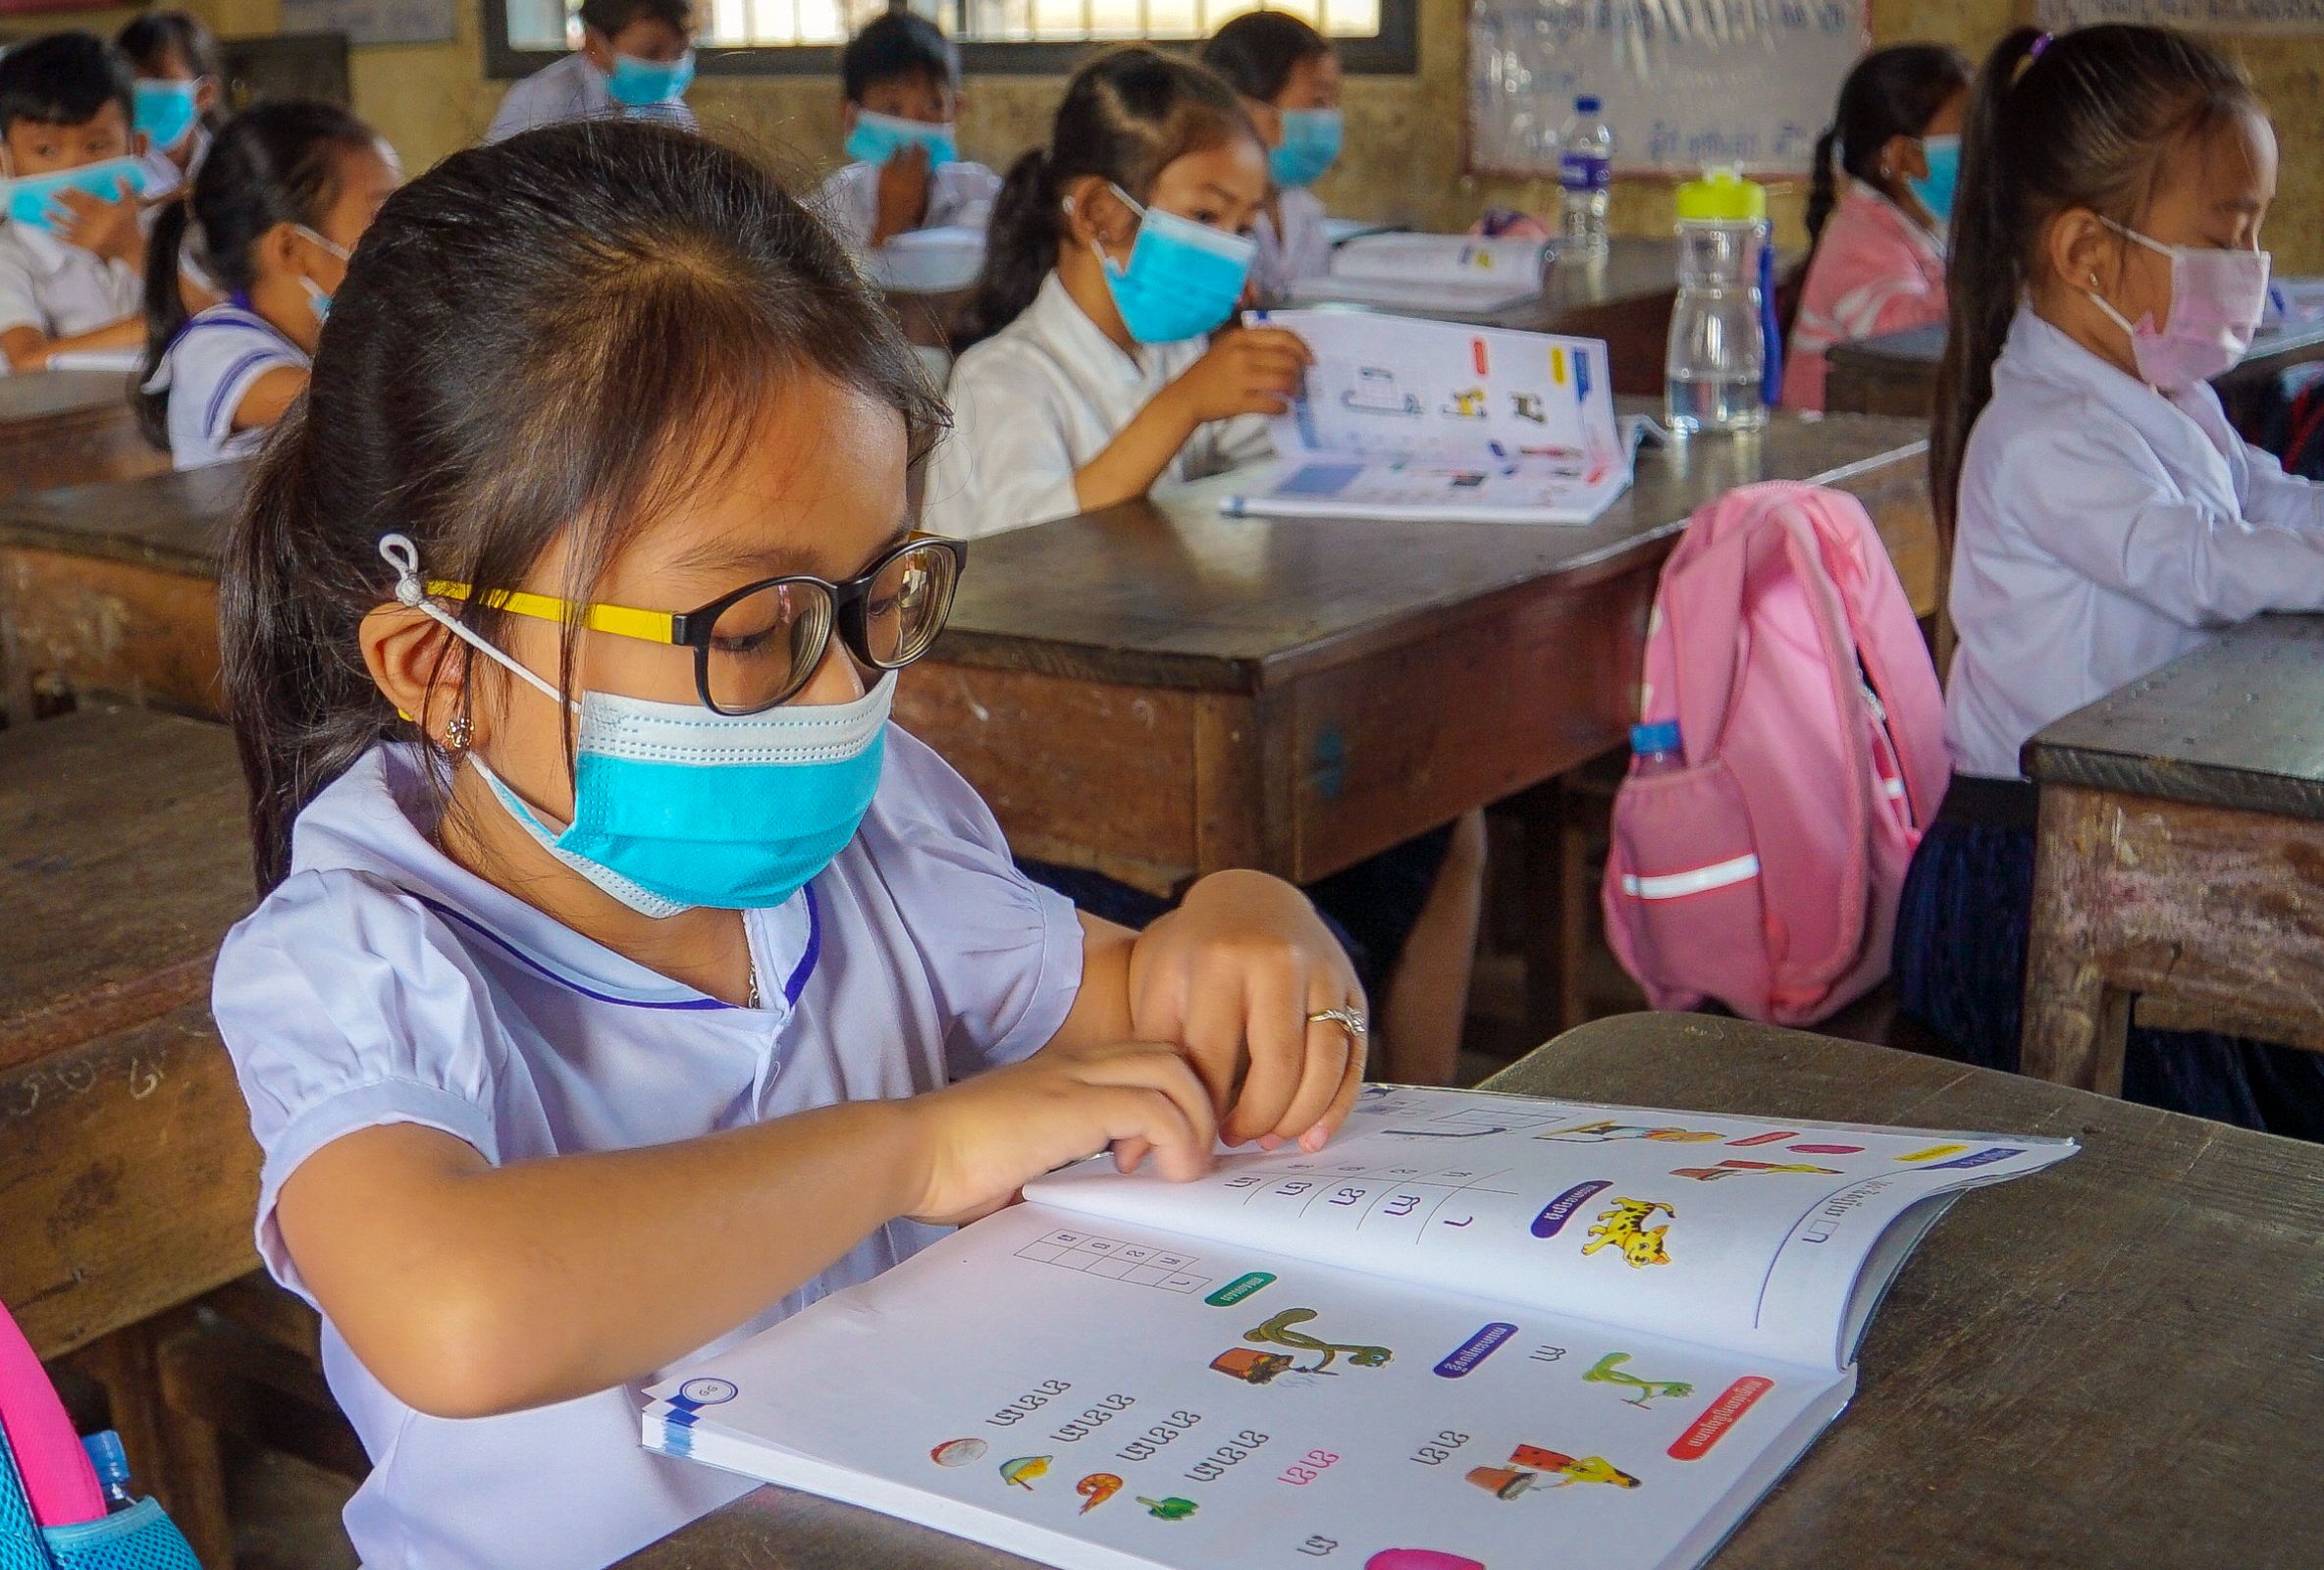 Resilience in Crisis: First indications of why children’s reading scores increased during the COVID-19 pandemic in Cambodia